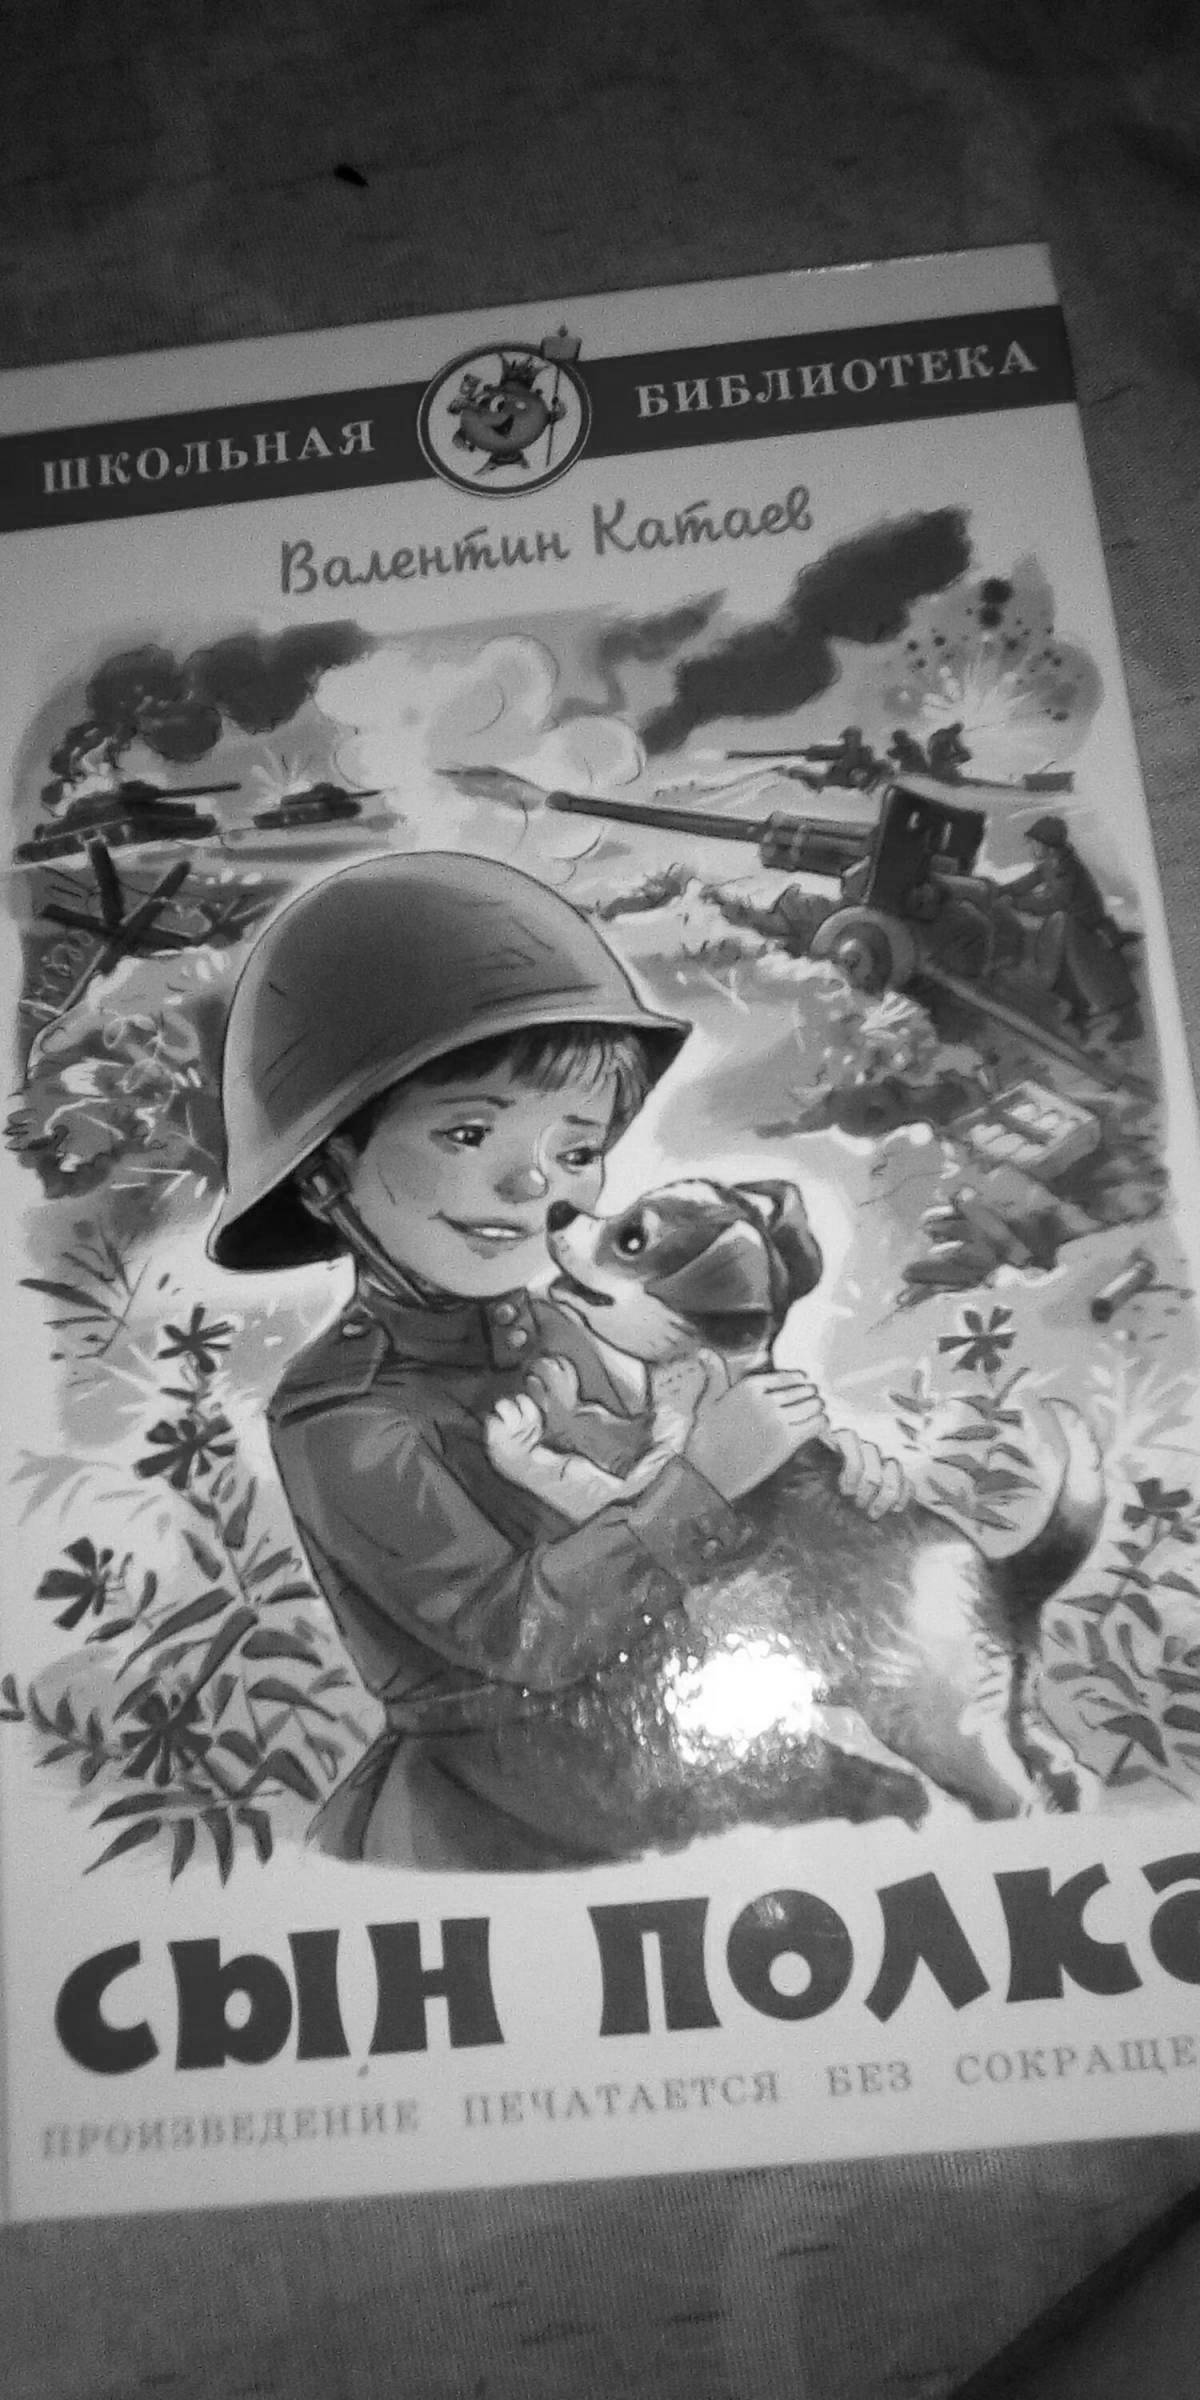 Exciting son of the regiment coloring book